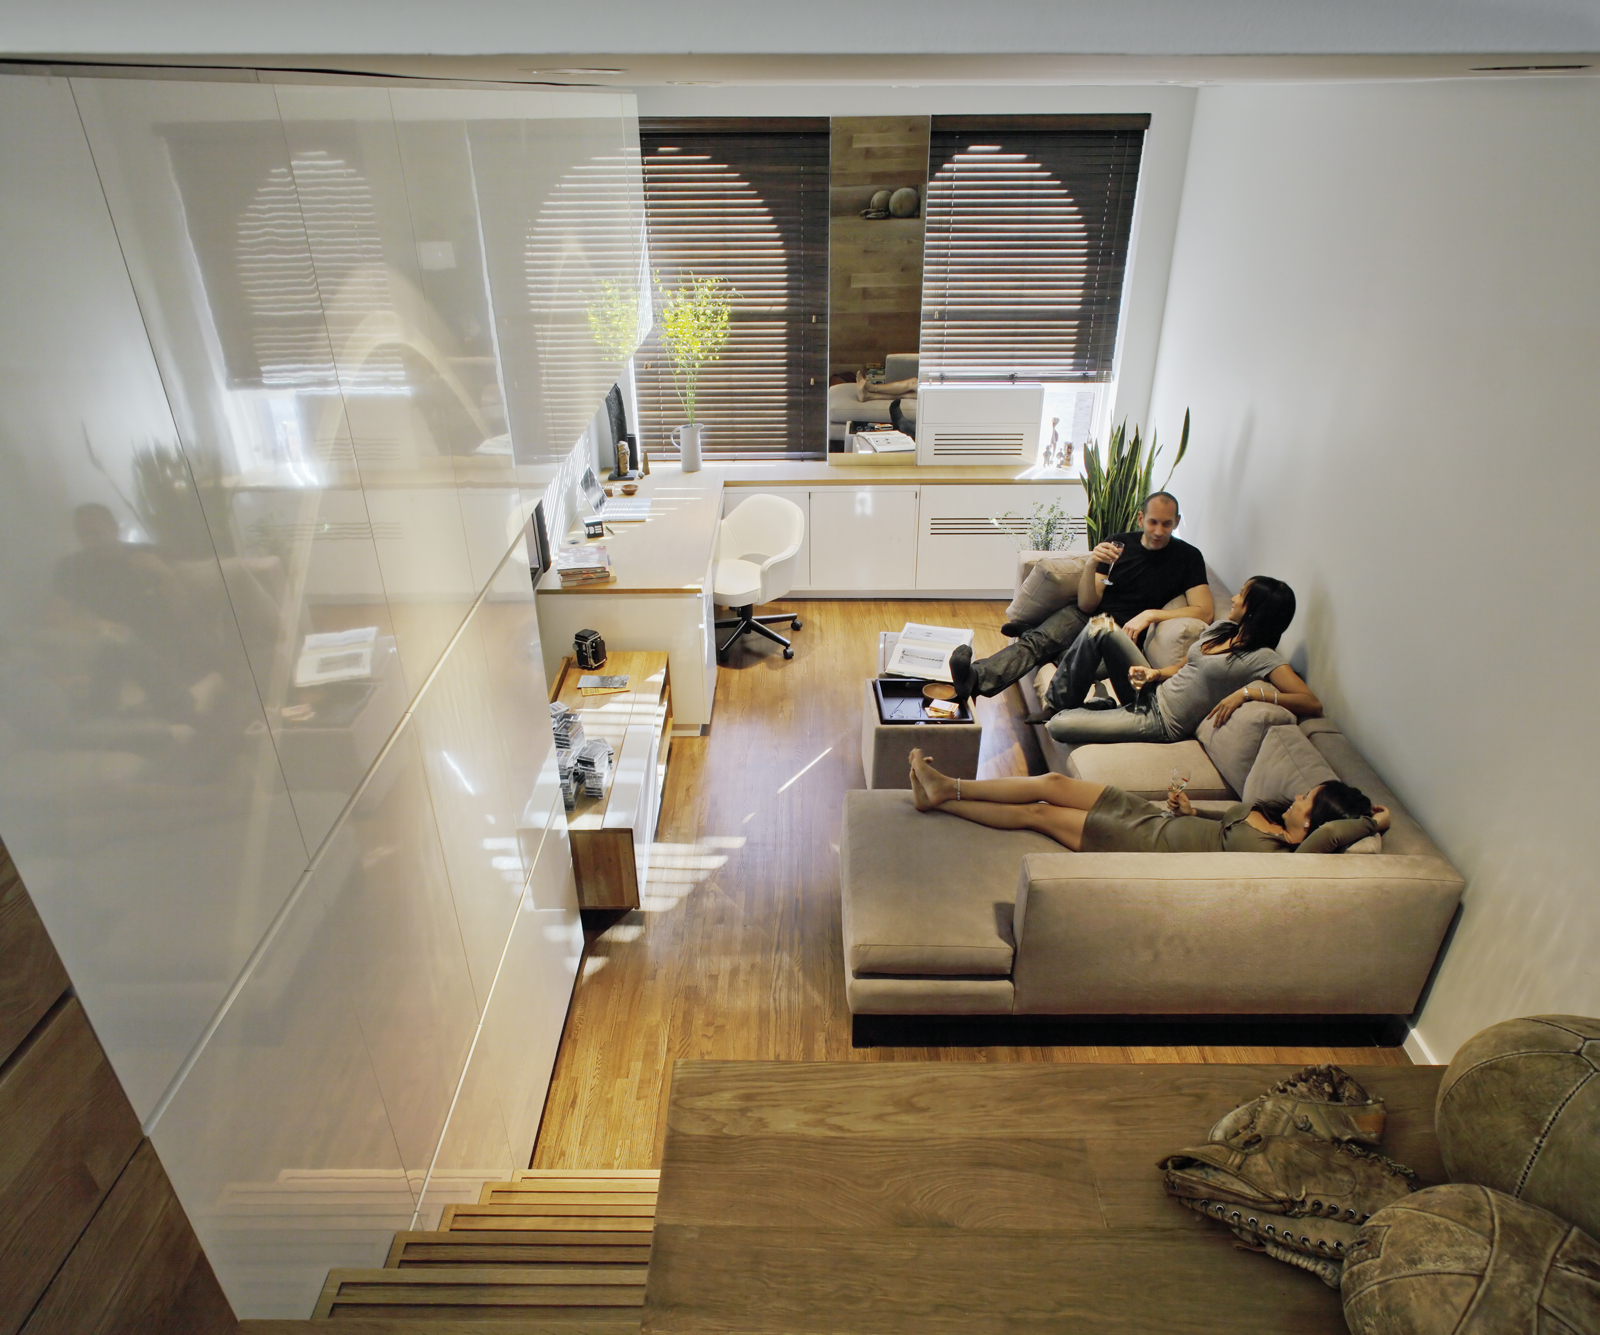 The end result is a flexible living space that accommodates the demands of both 